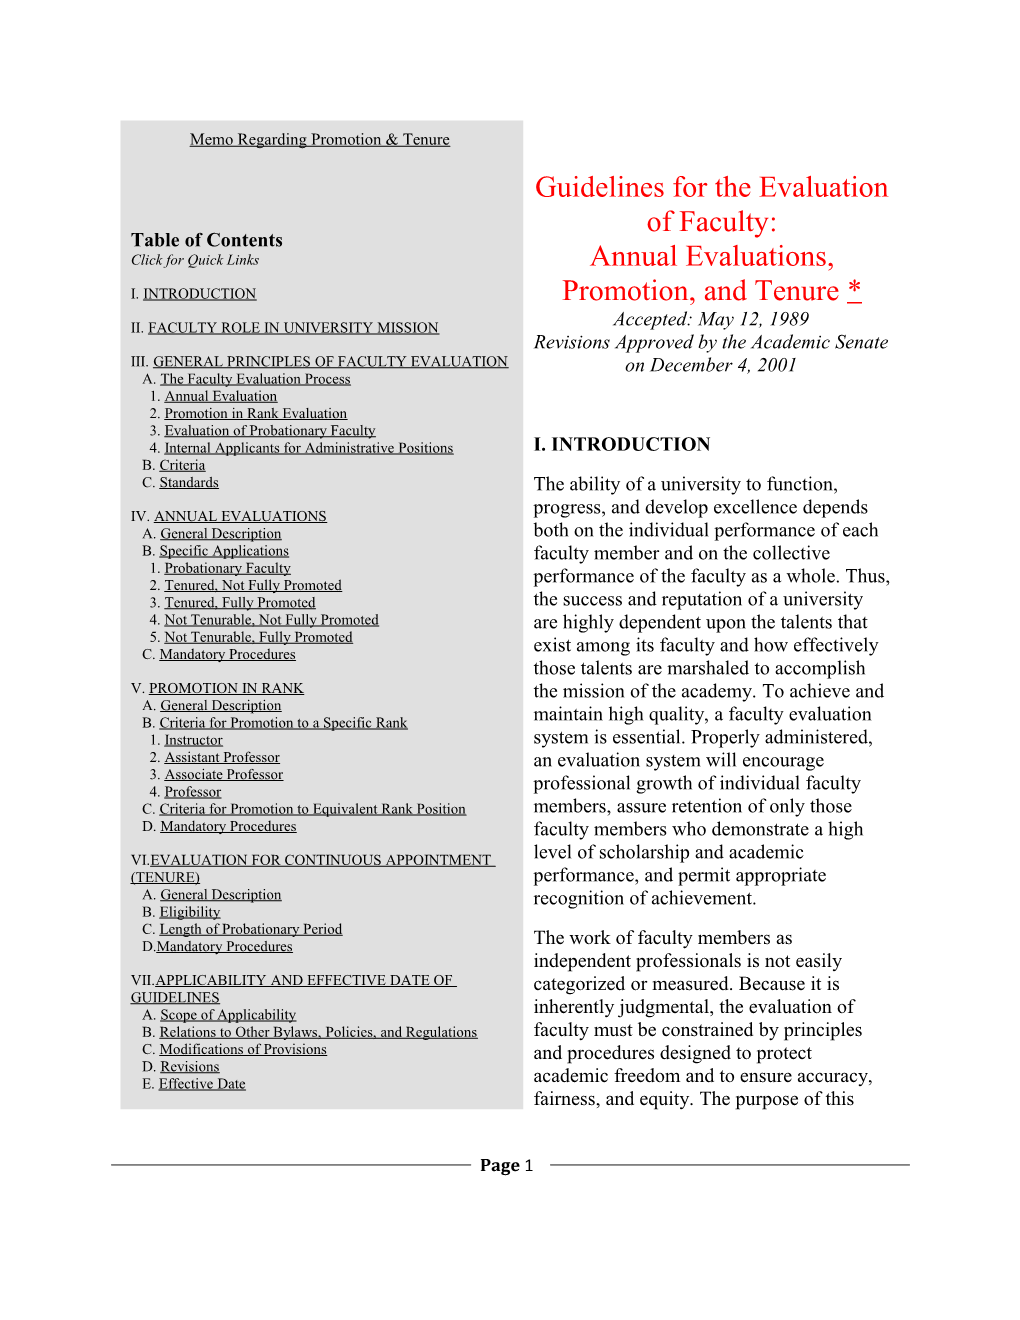 Guidelines for Evaluation of Faculty: Annual Evaluations, Promotion, and Tenure